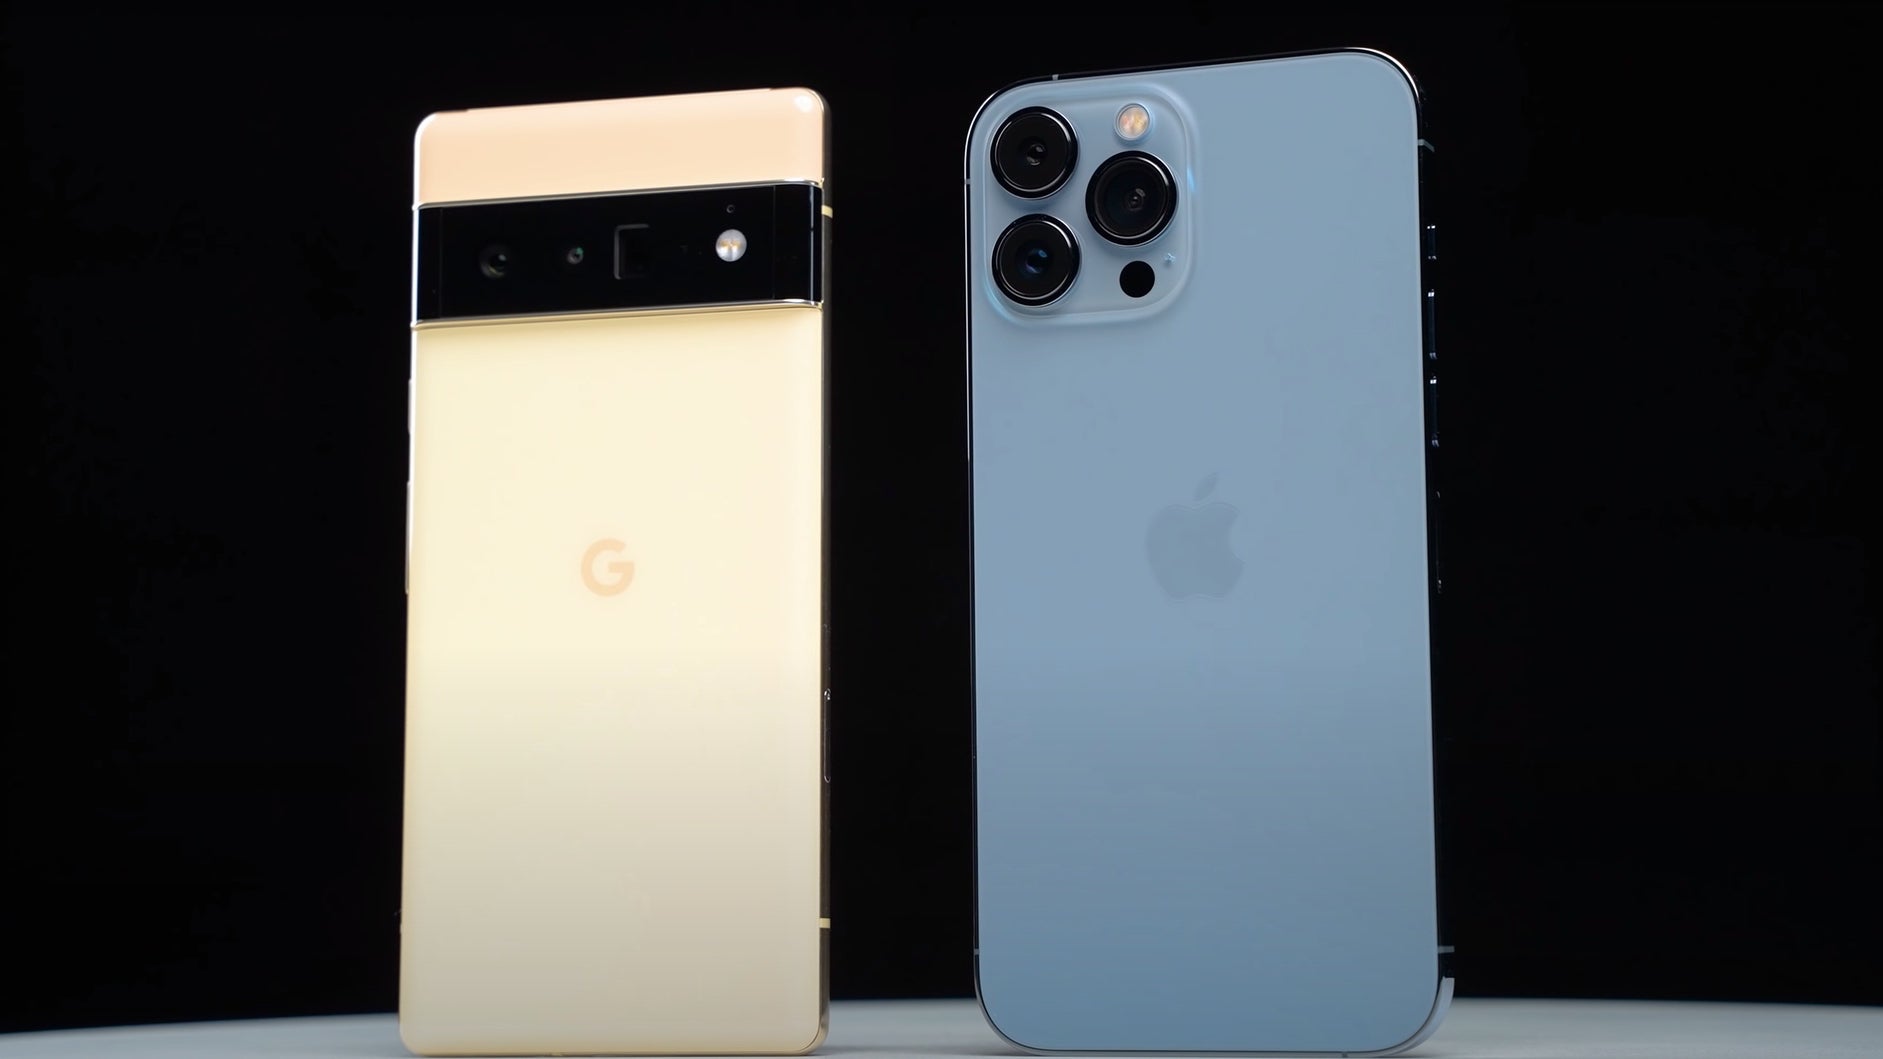 Suspiciously similar iPhone 14 Pro and Pixel 7 Pro designs: Who's the copycat?